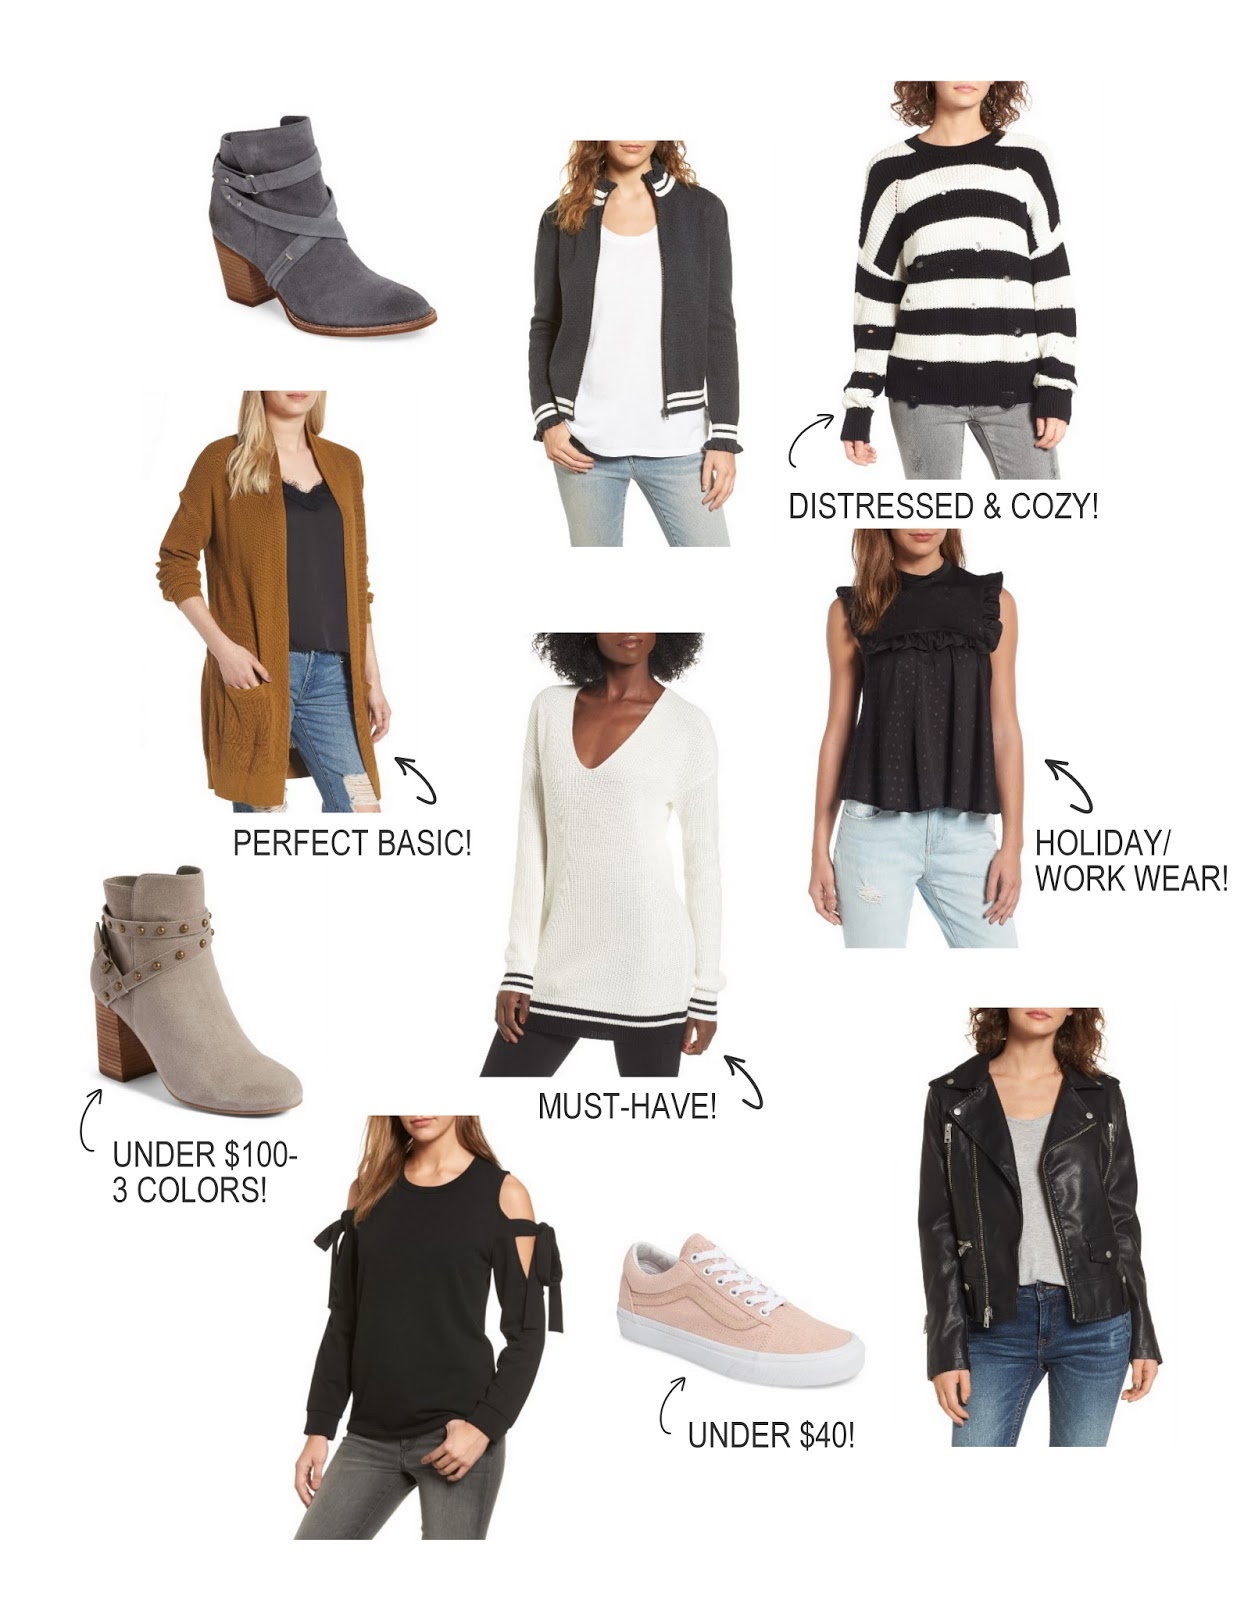 Nordstrom Anniversary Sale Early Access Picks